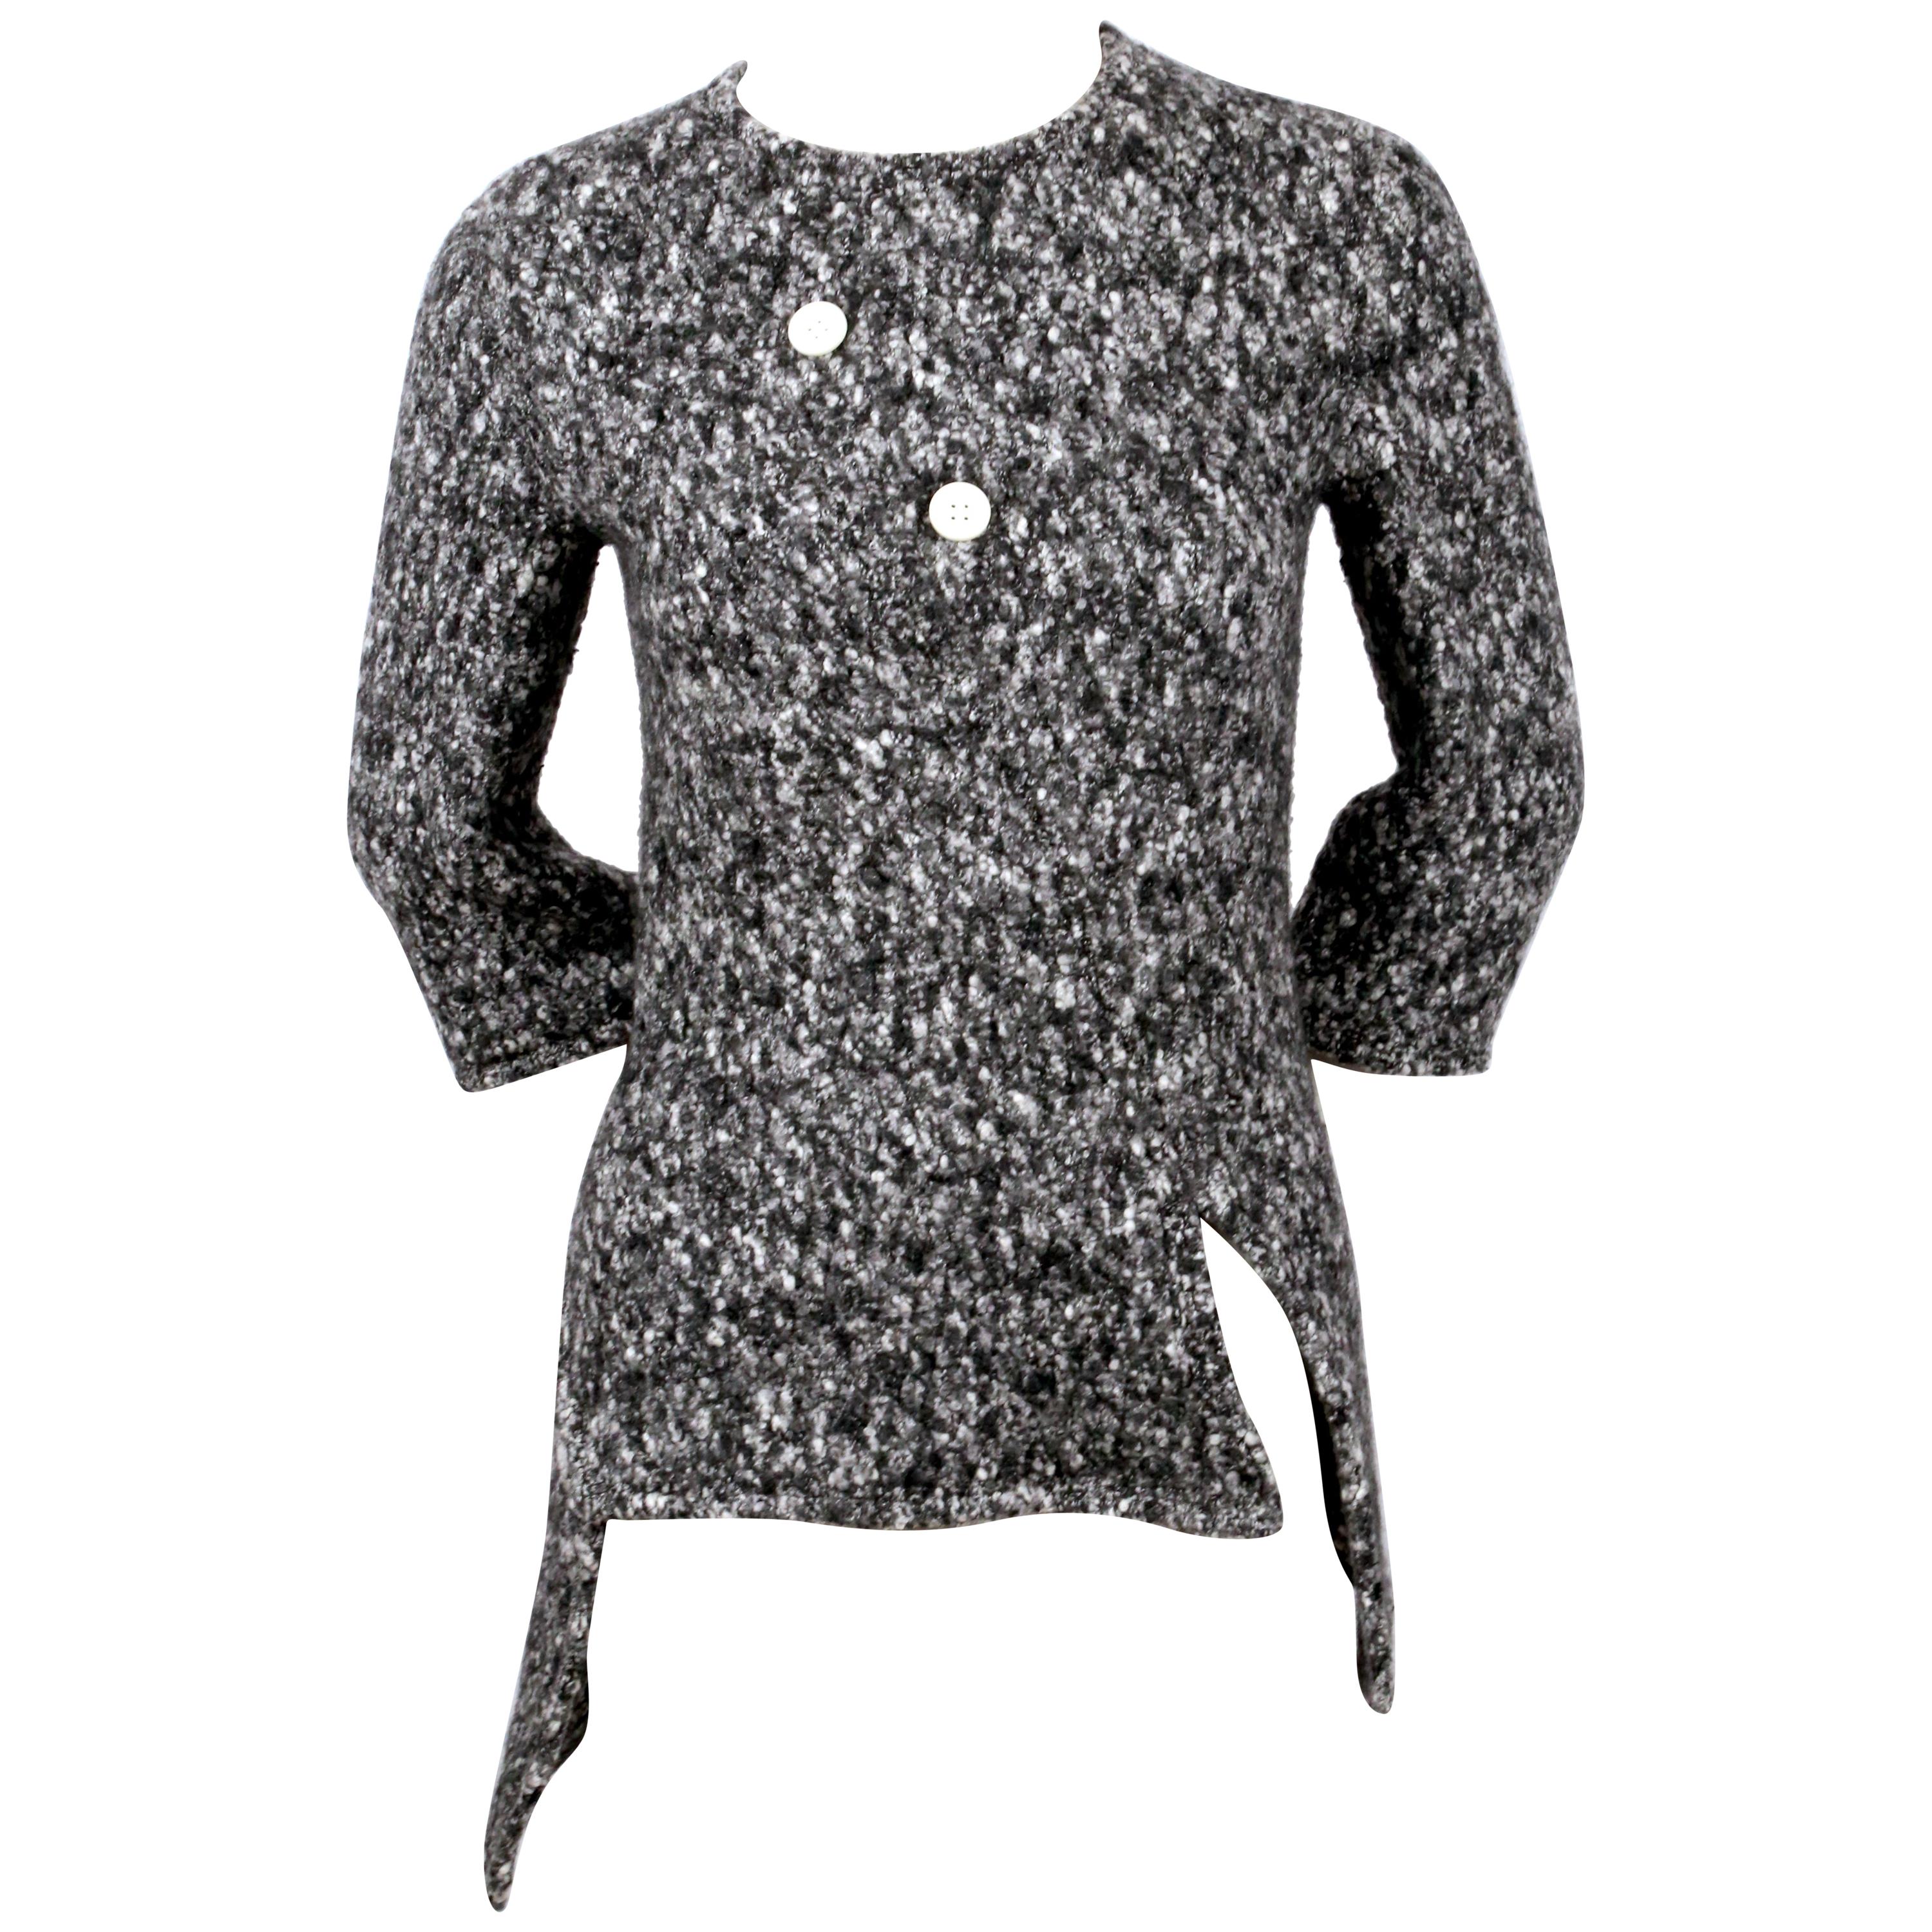 NEW 2014 CELINE by PHOEBE PHILO boucle knit runway sweater For Sale